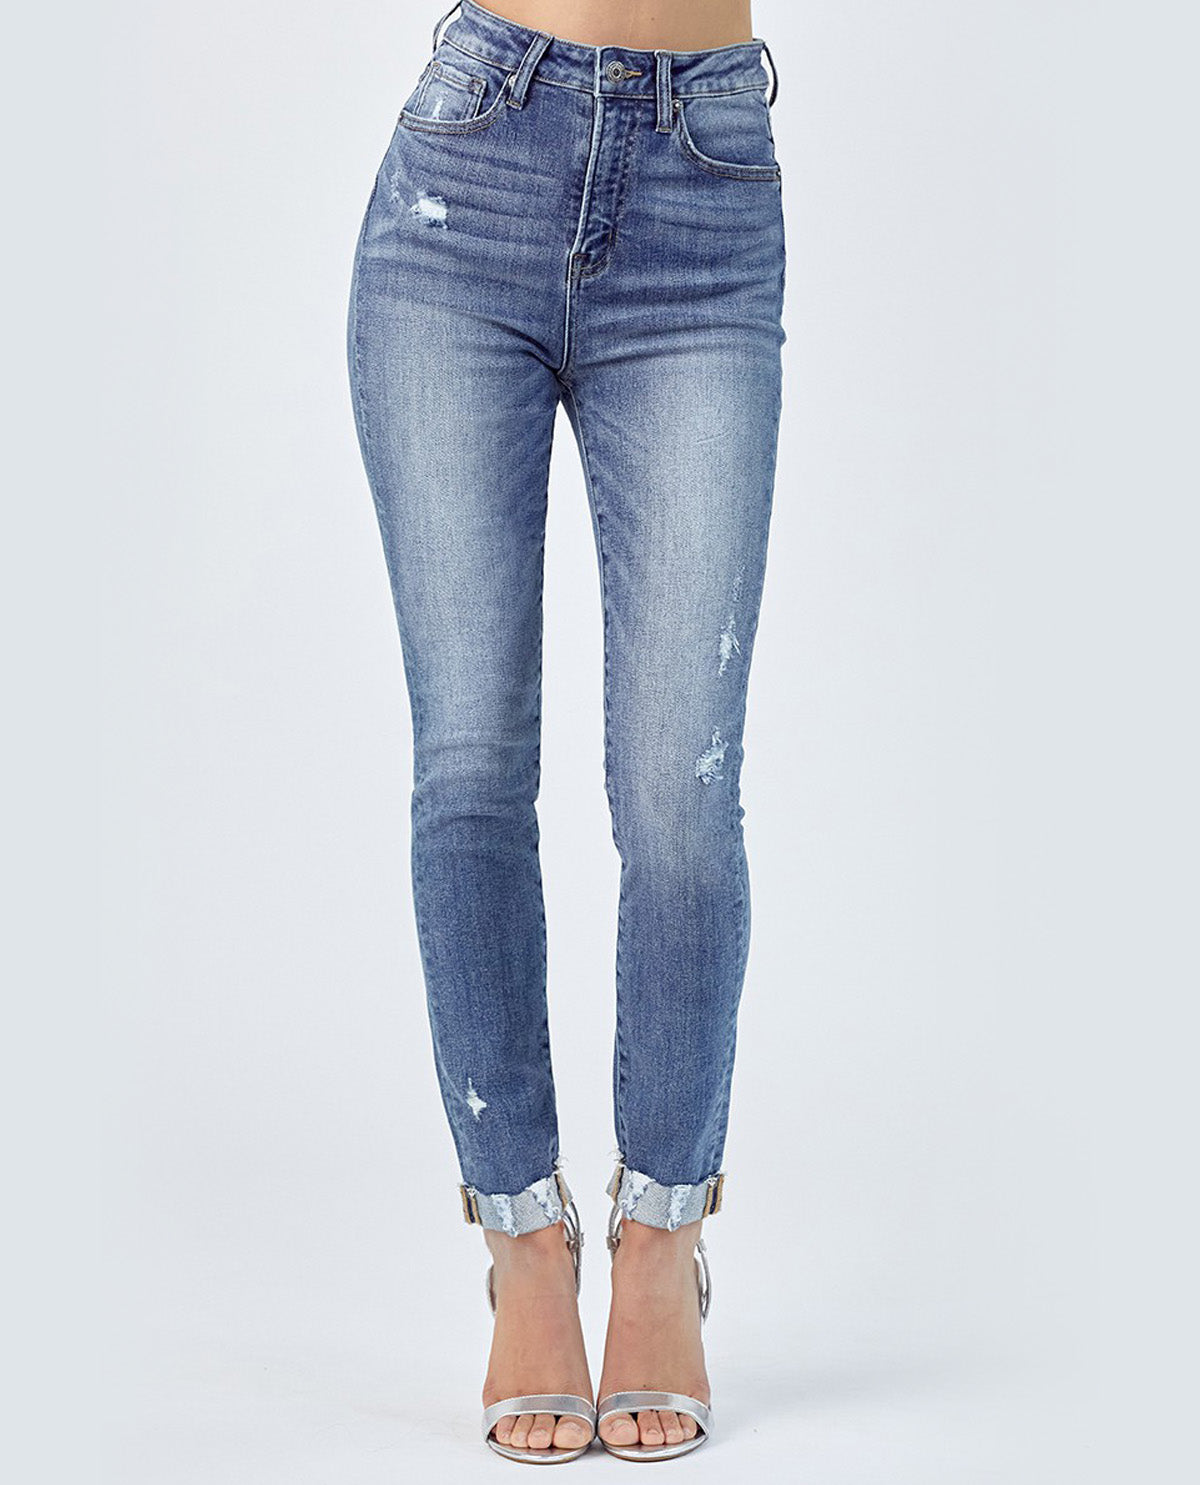 Risen PLUS High Rise Vintage Washed Skinny Jeans with Cuff